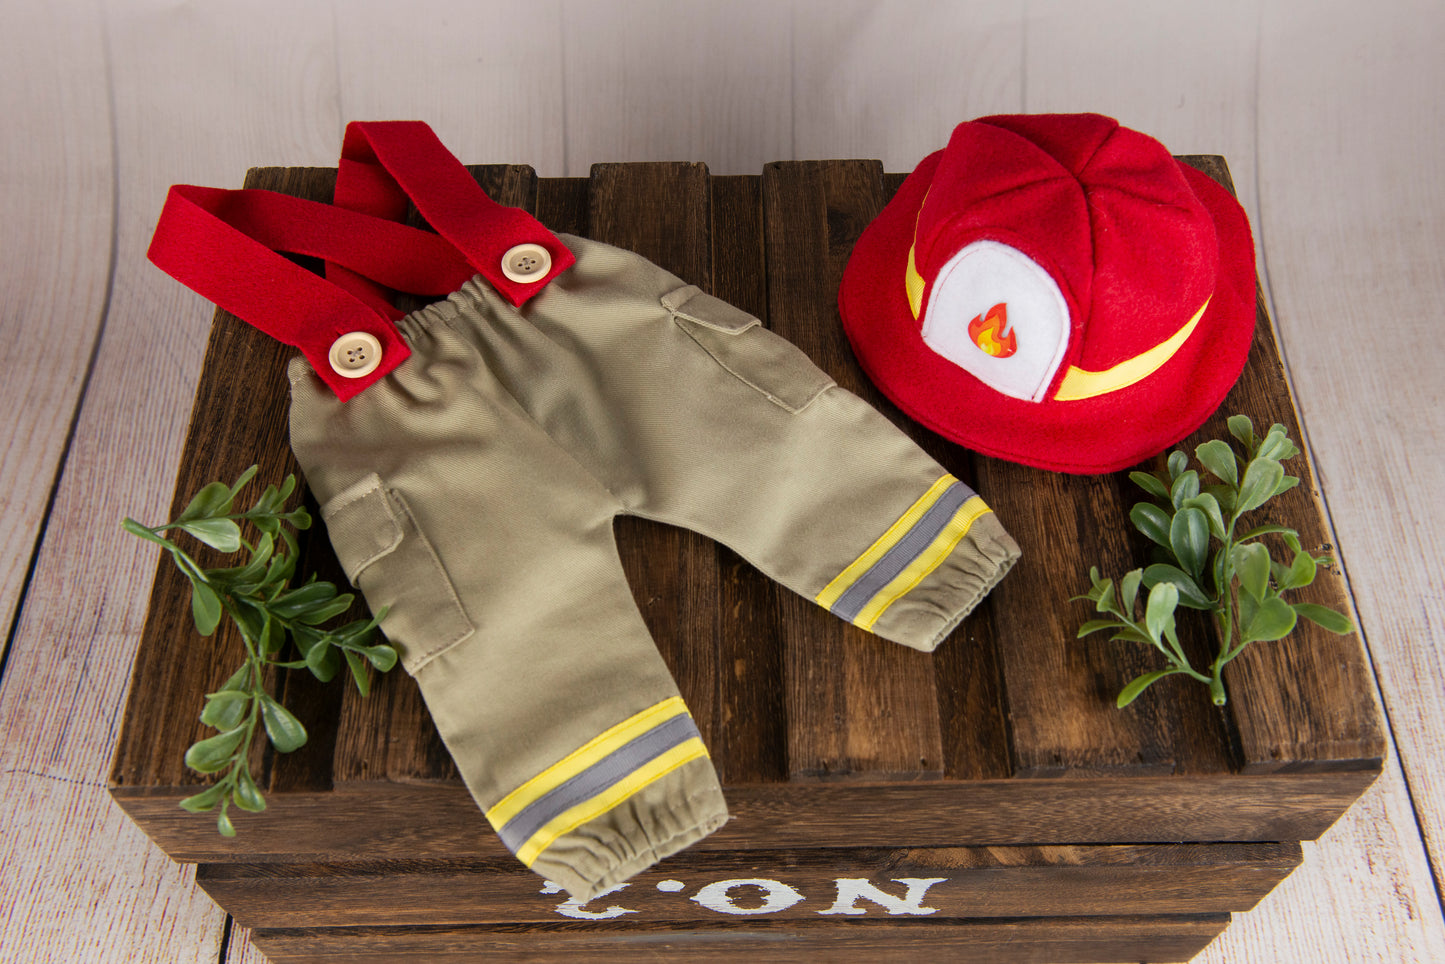 Firefighter Outfit